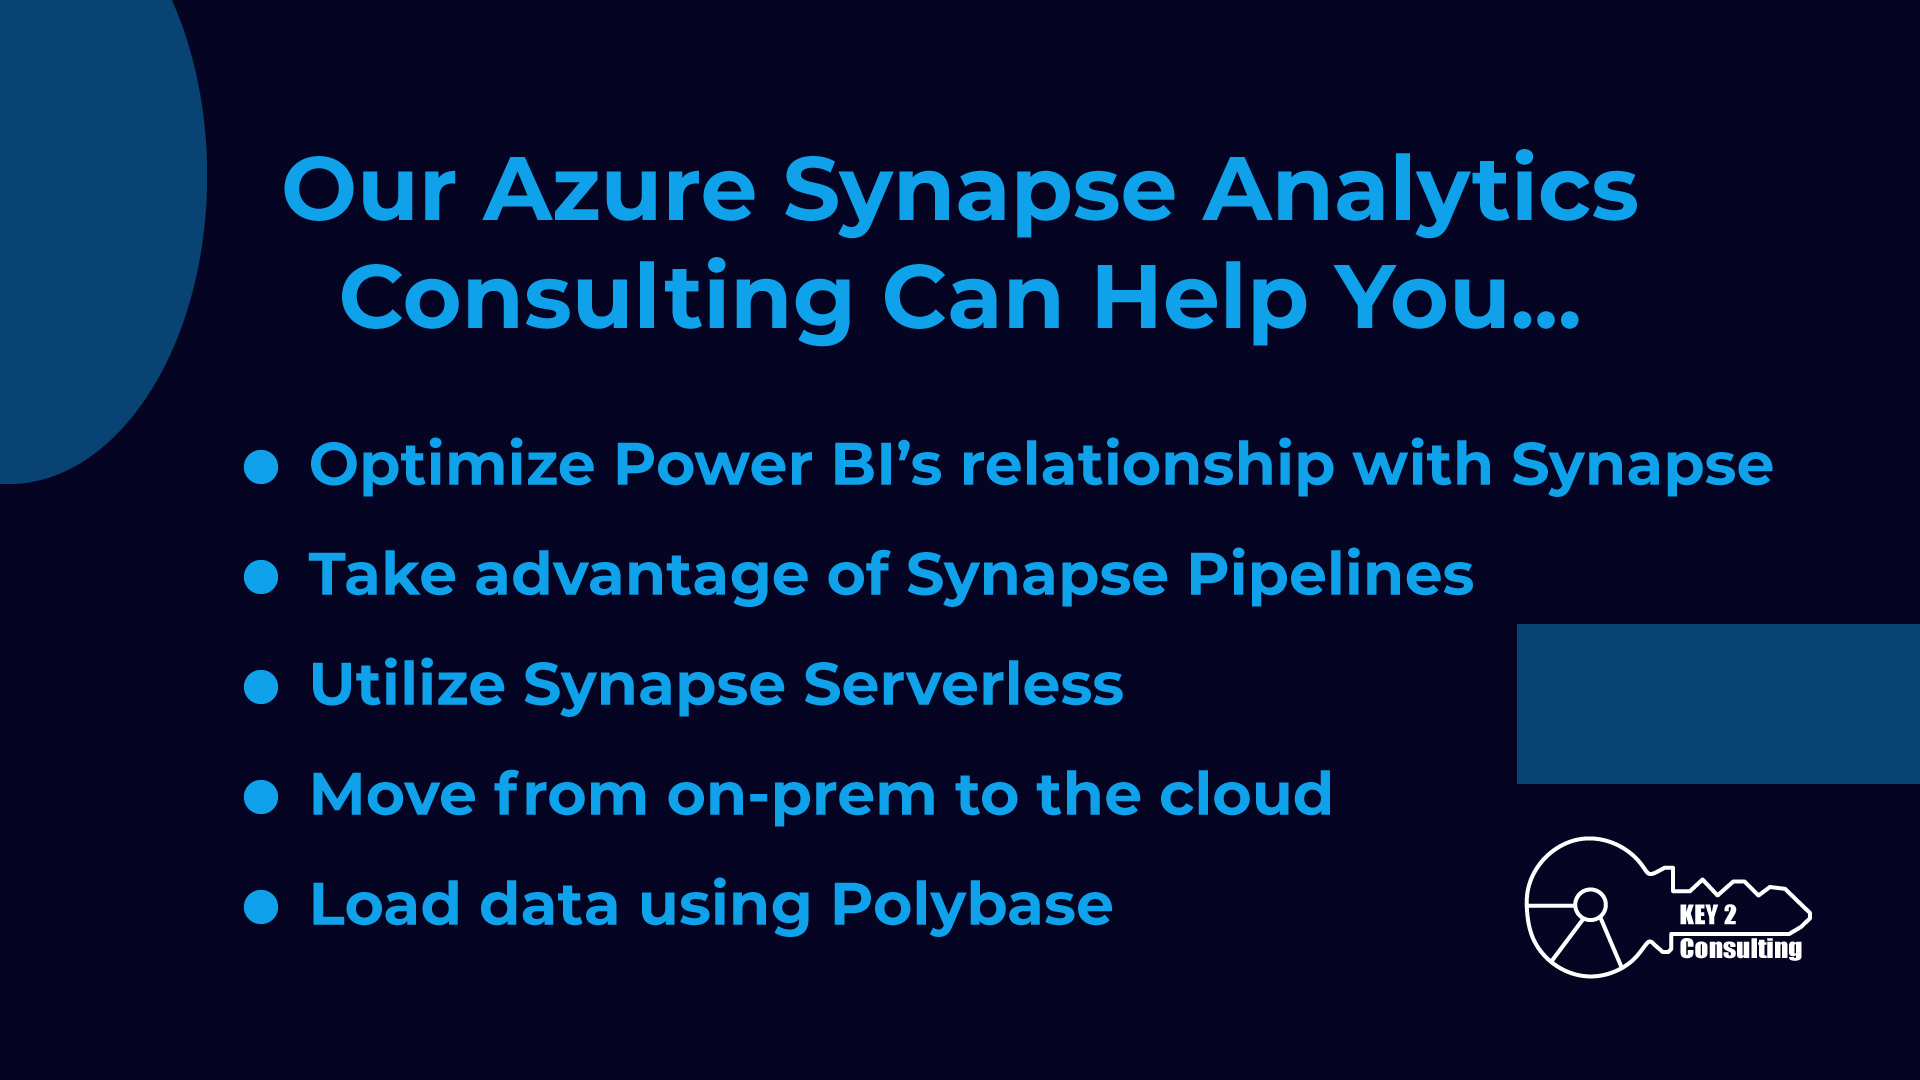 Our Azure Synapse Analytics consulting services